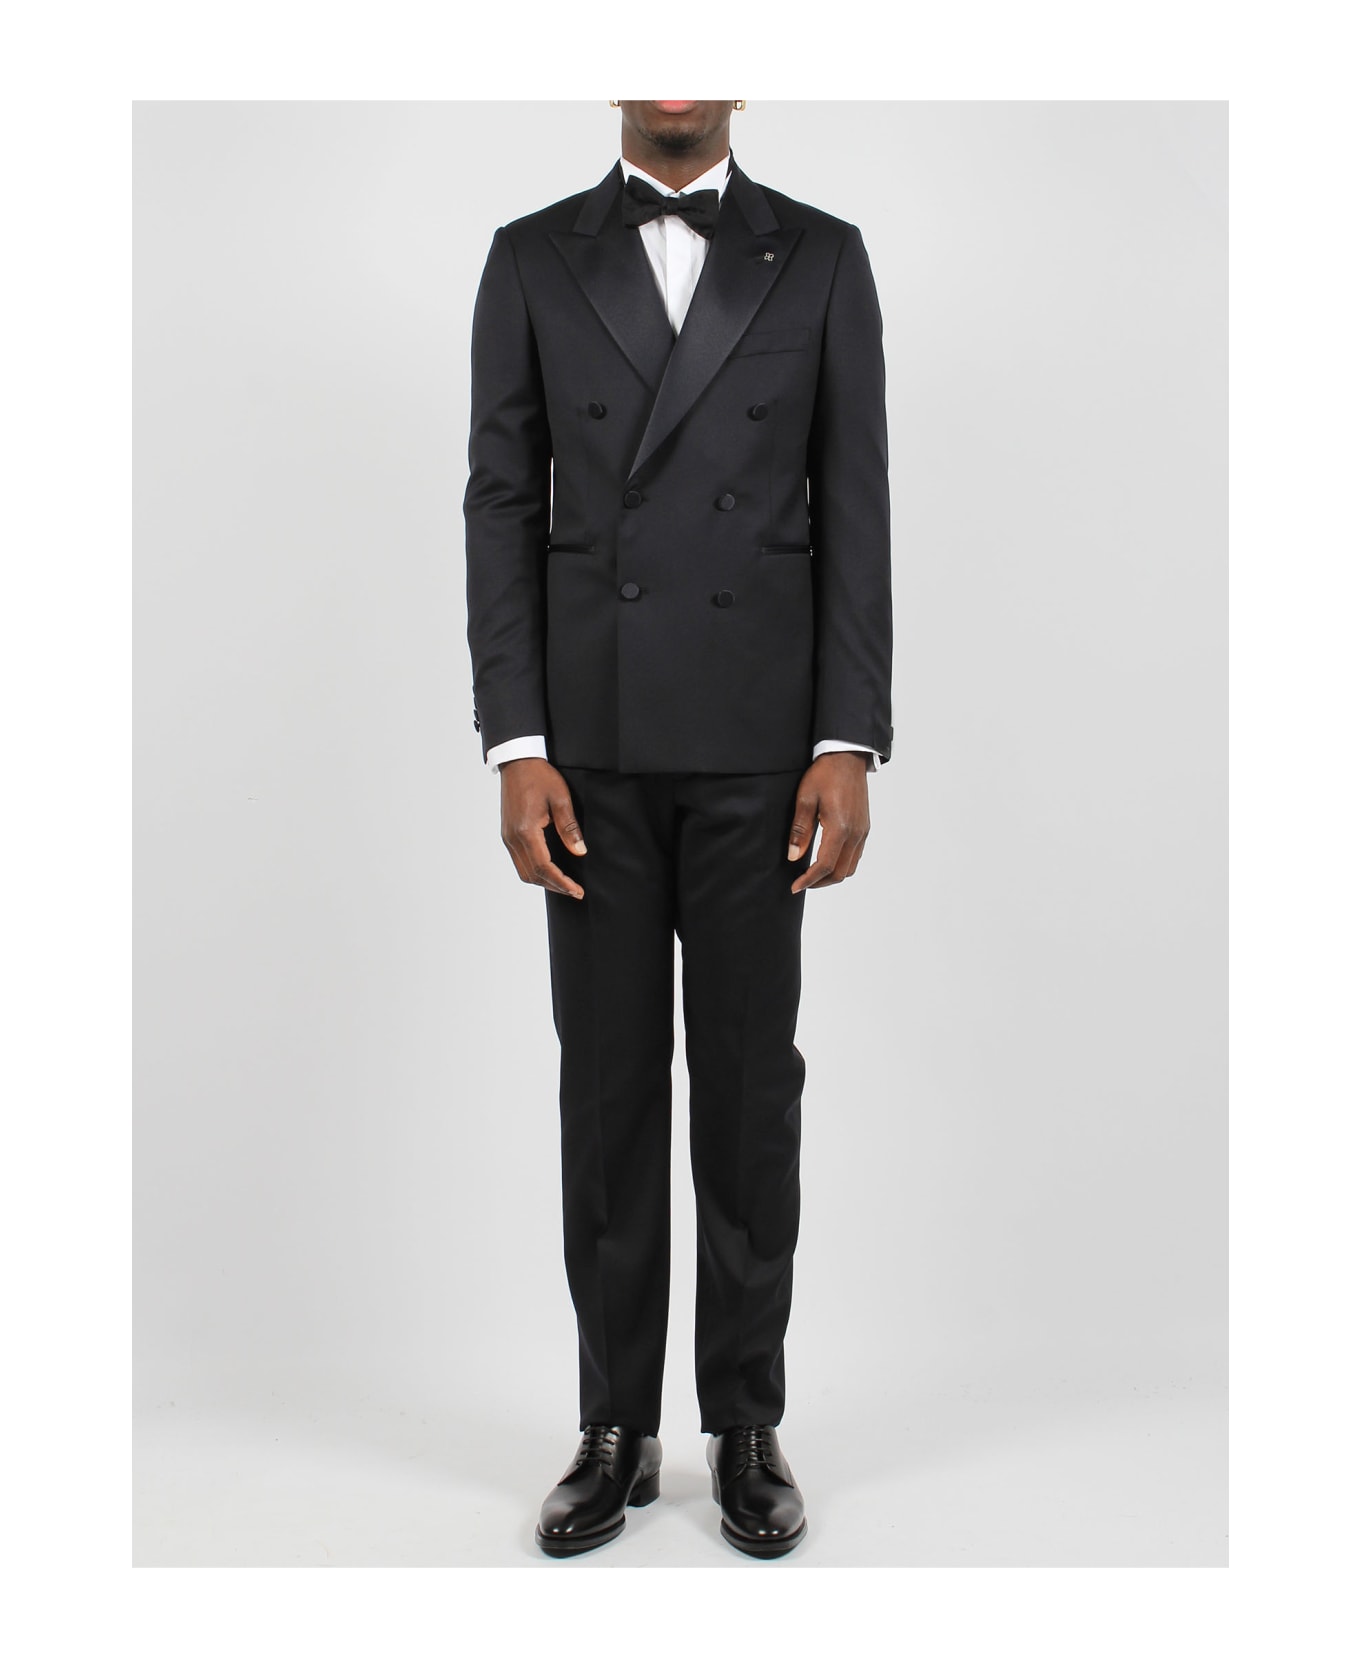 Tagliatore Double Breasted Tailored Suit - Blue